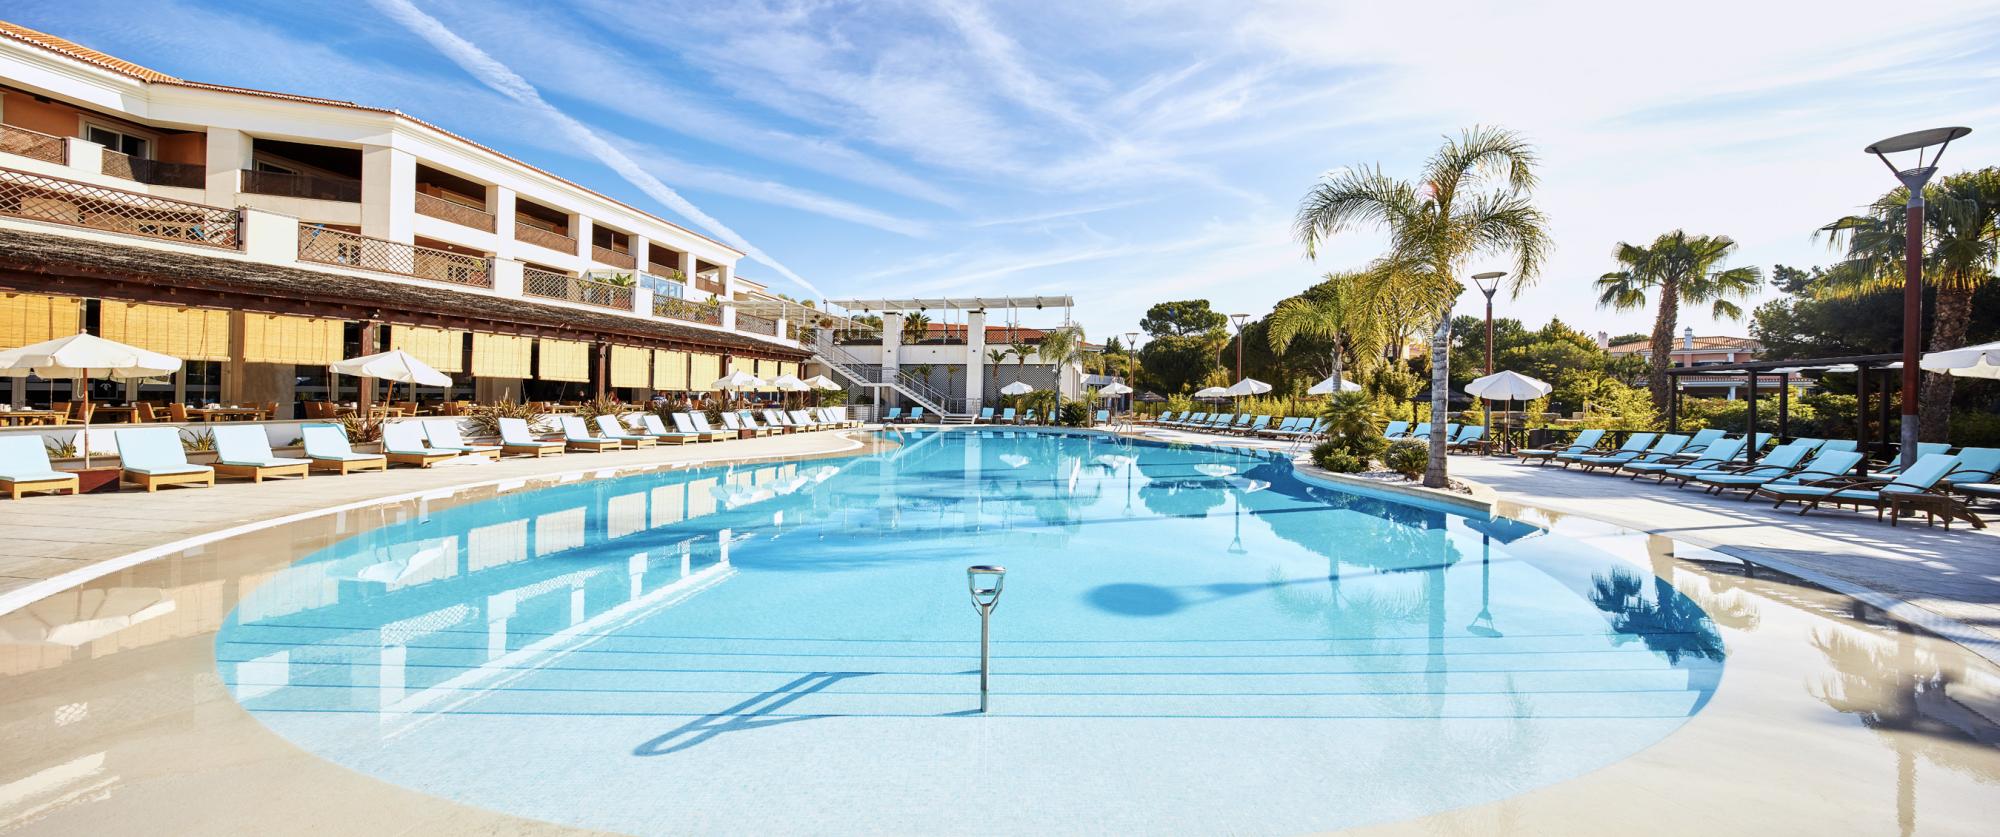 All The Wyndham Grand Algarve's scenic main pool within magnificent Algarve.